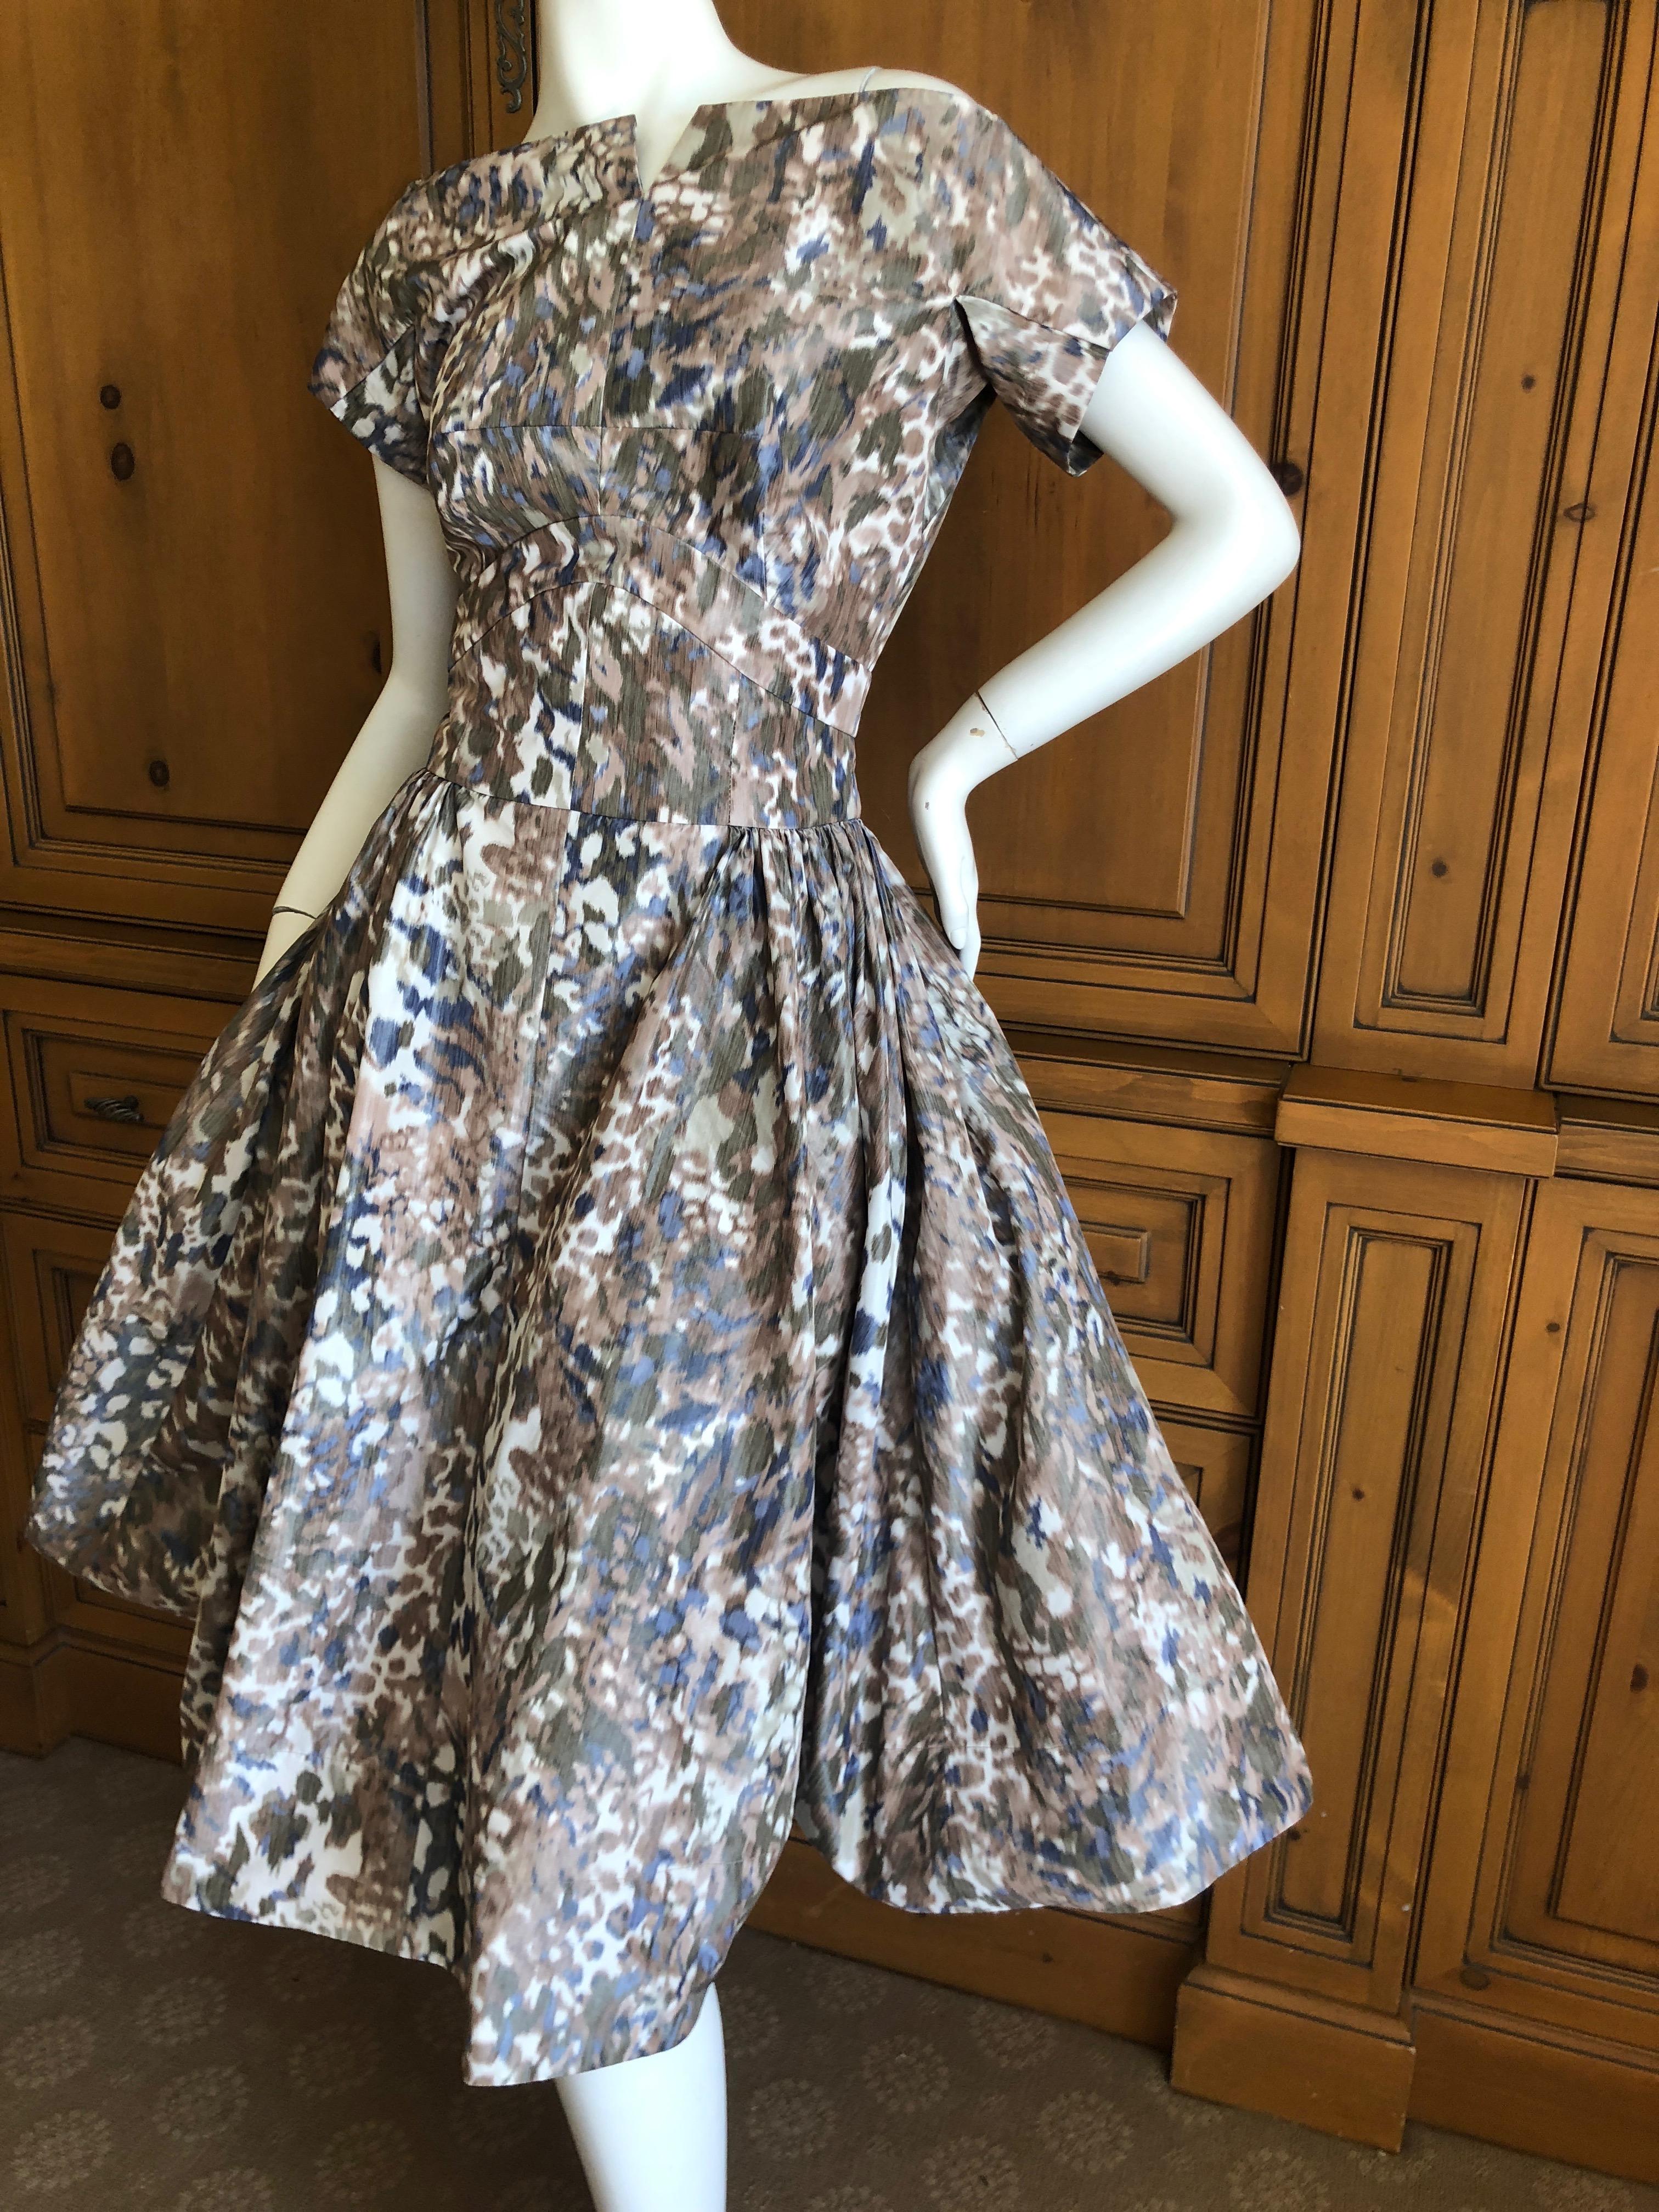 Vivienne Westwood Red Label Taffeta Floral Print 40's Style Dress   In Excellent Condition For Sale In Cloverdale, CA